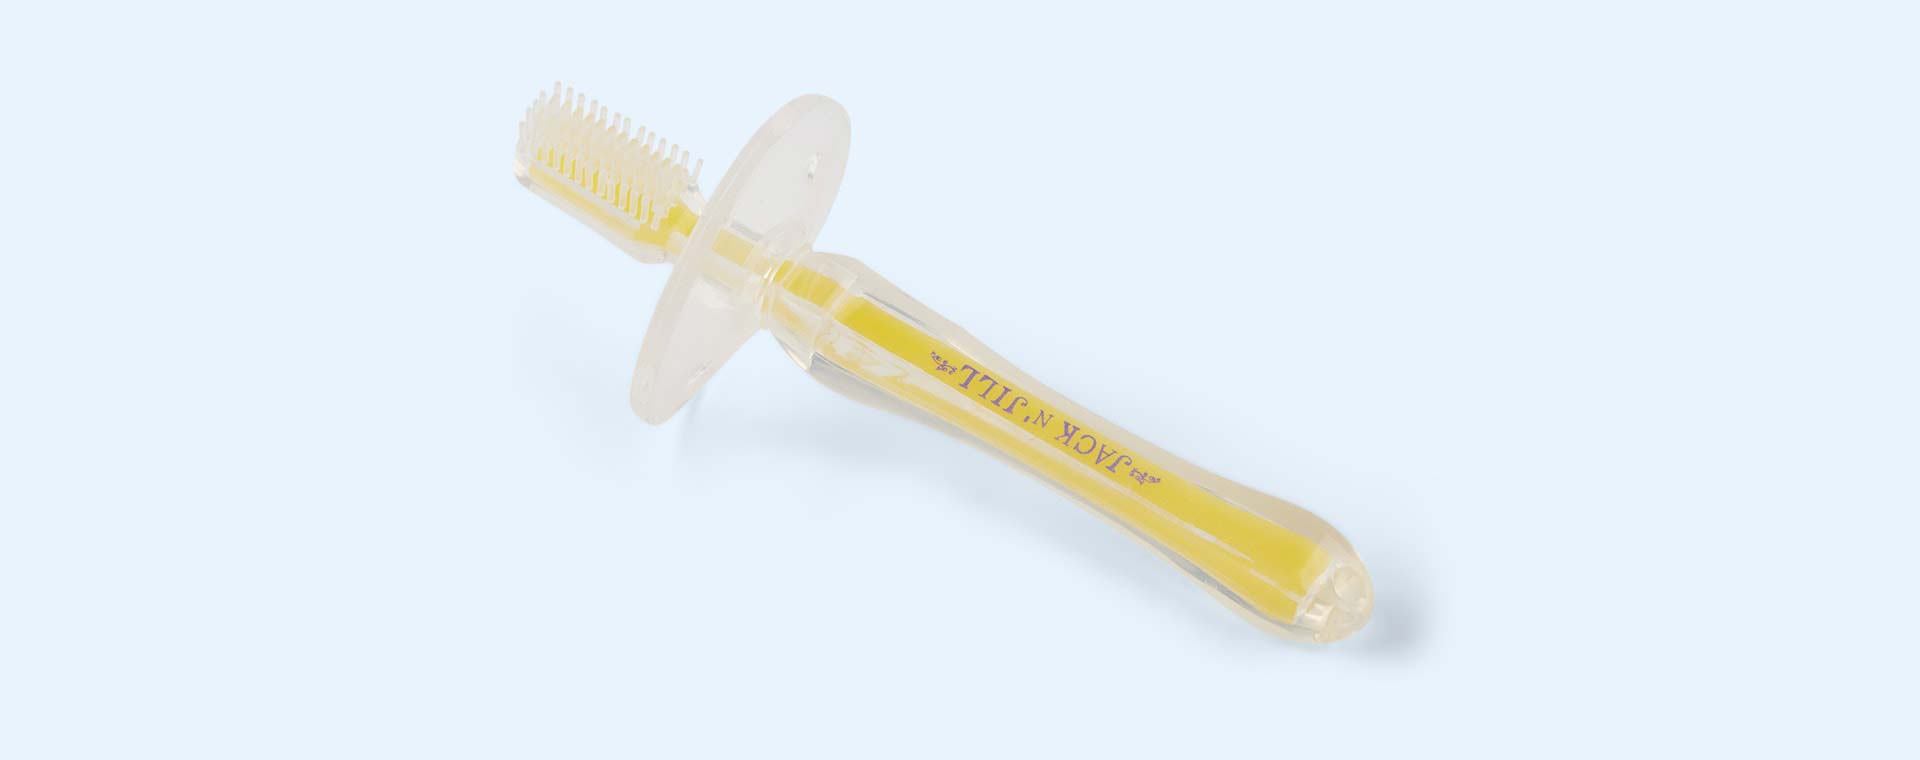 Yellow Jack N' Jill Stage 2 Silicone Baby Toothbrush